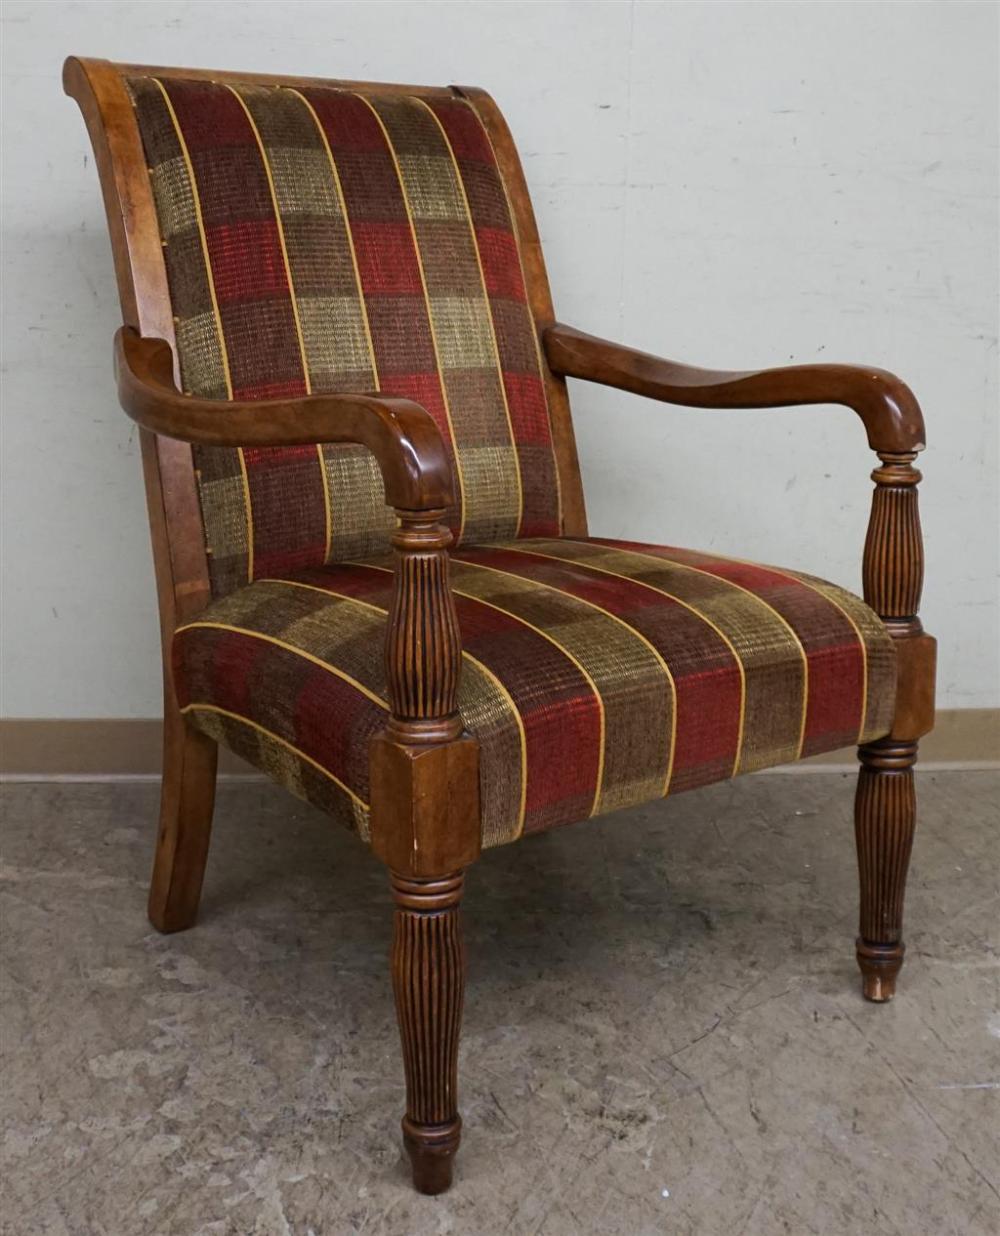 FAIRFIELD CHAIR CO FRUITWOOD UPHOLSTERED 327eb9